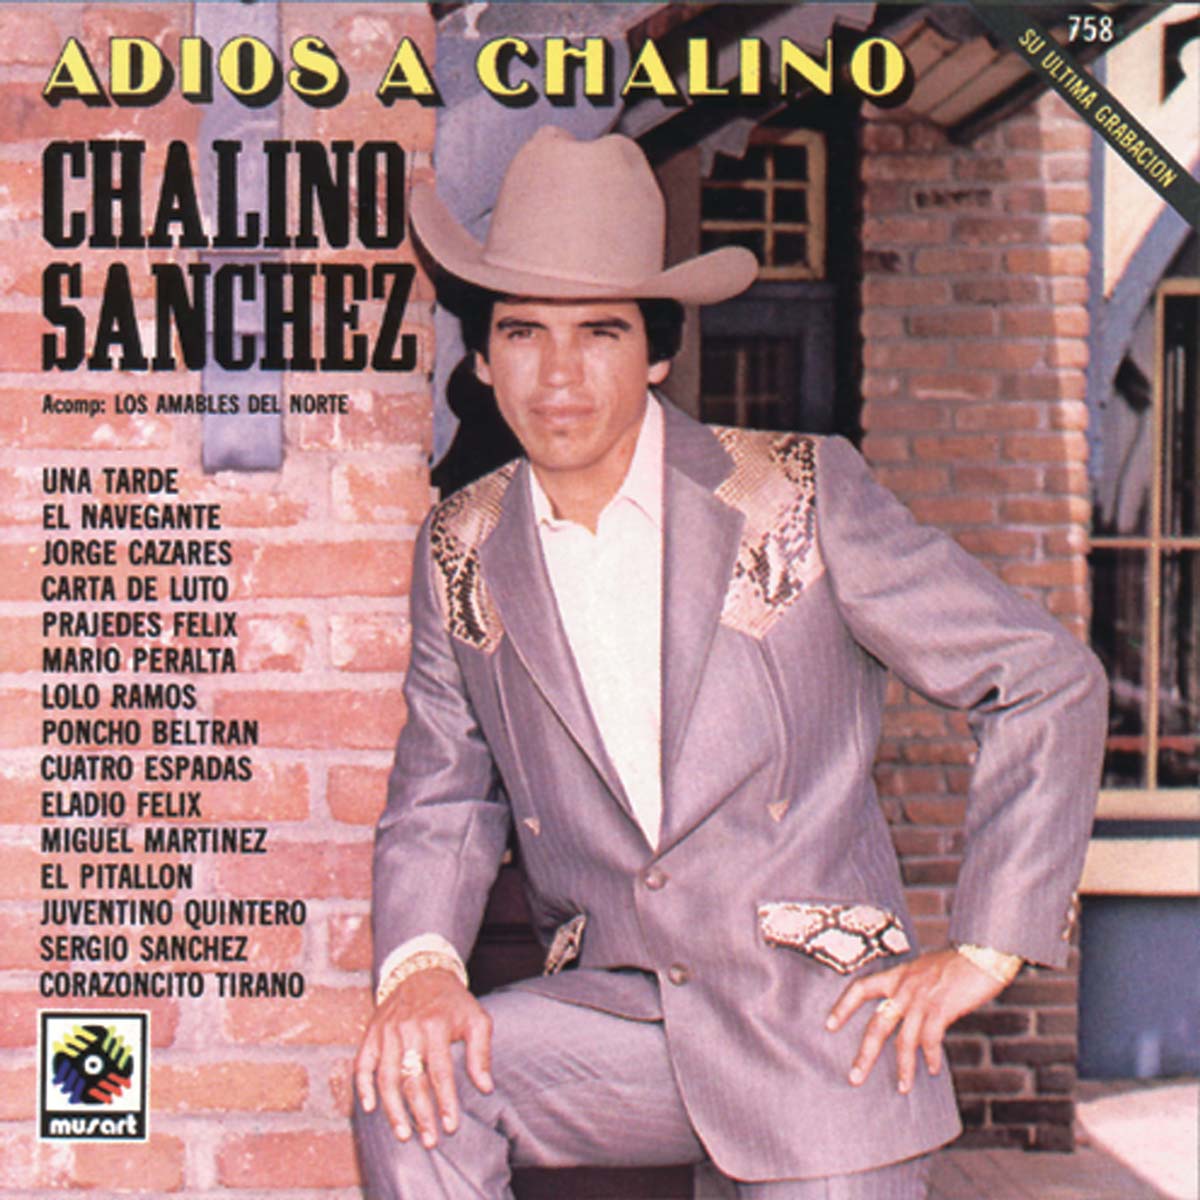 Featured Image for “Adiós A Chalino”